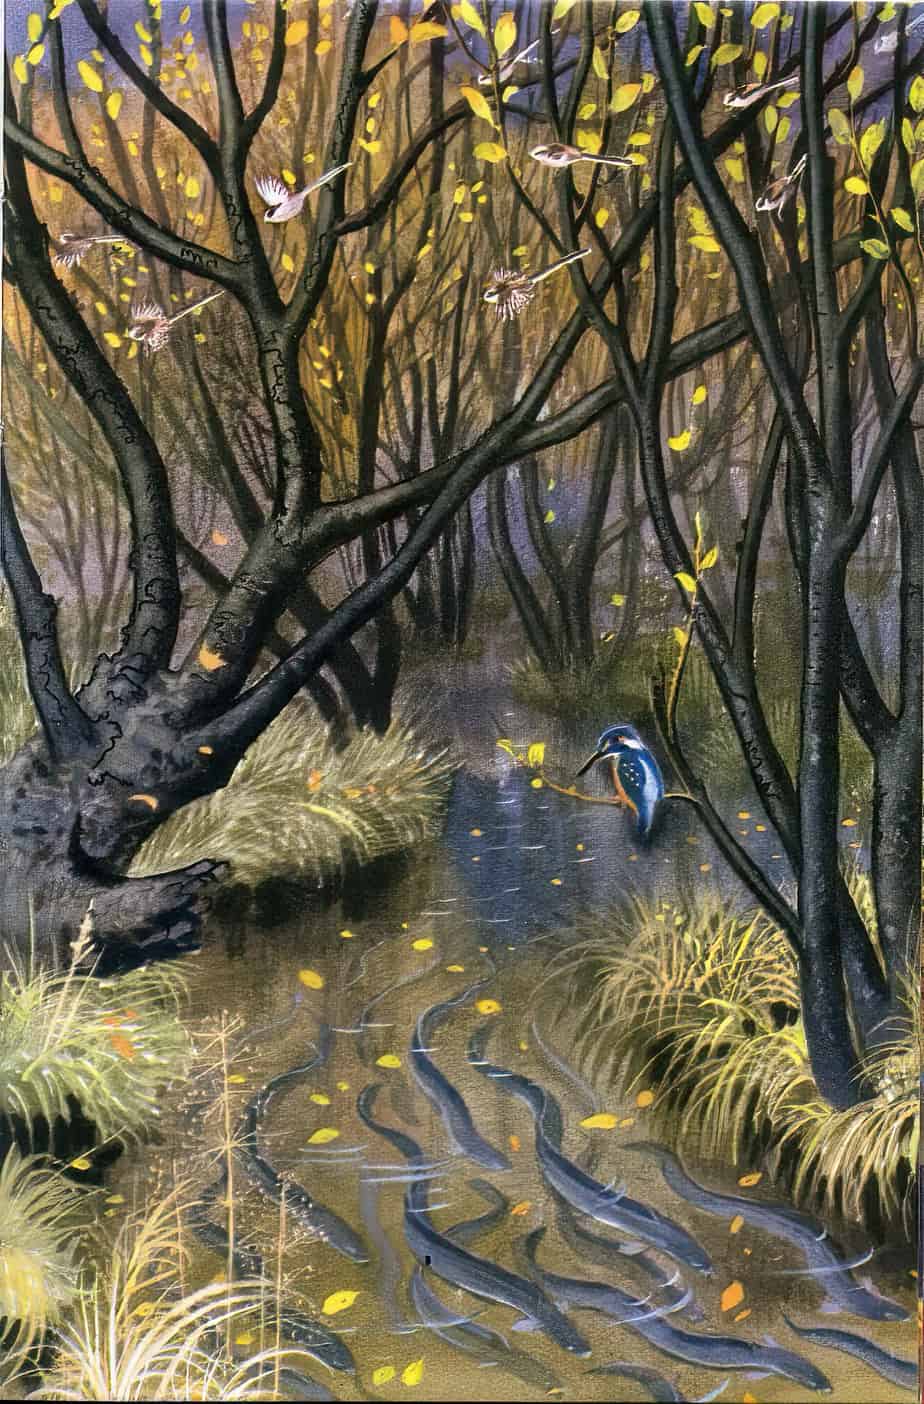 C.F. Tunnicliffe for What To Look For In Autumn (Ladybird) kingfisher